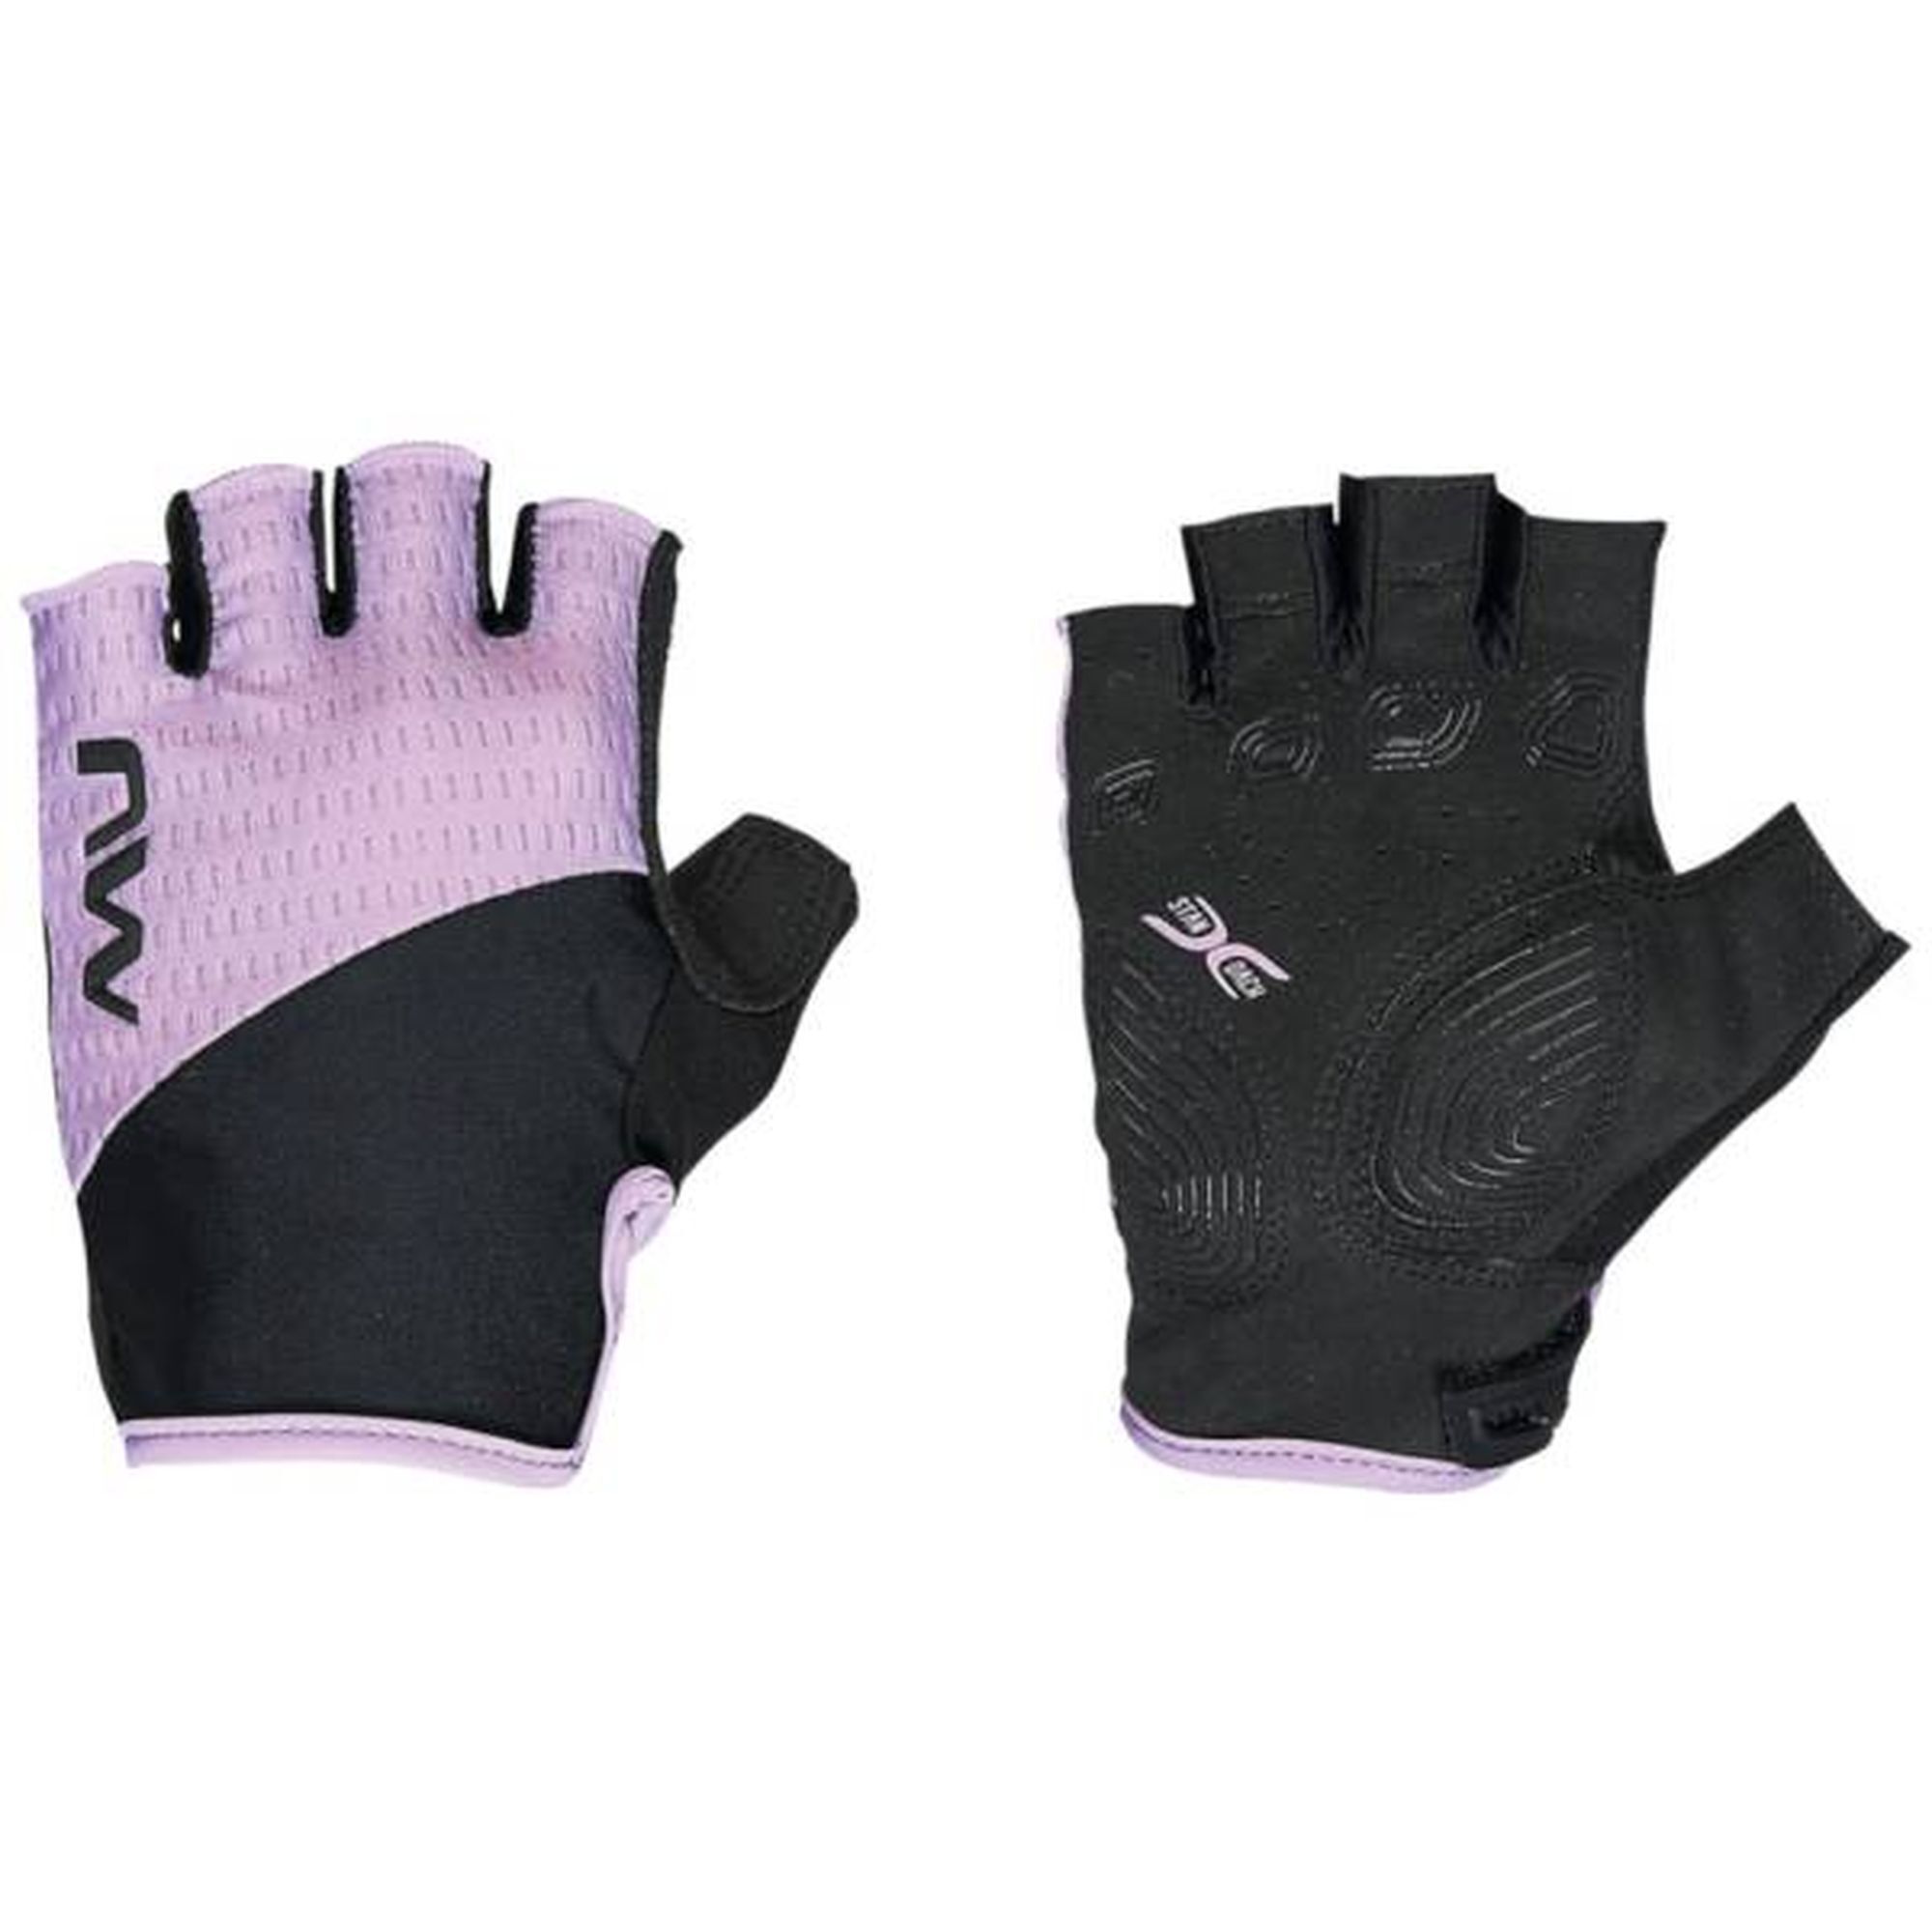 Northwave Fast Woman Short Finger Glove - Guantes cortos ciclismo | Hardloop